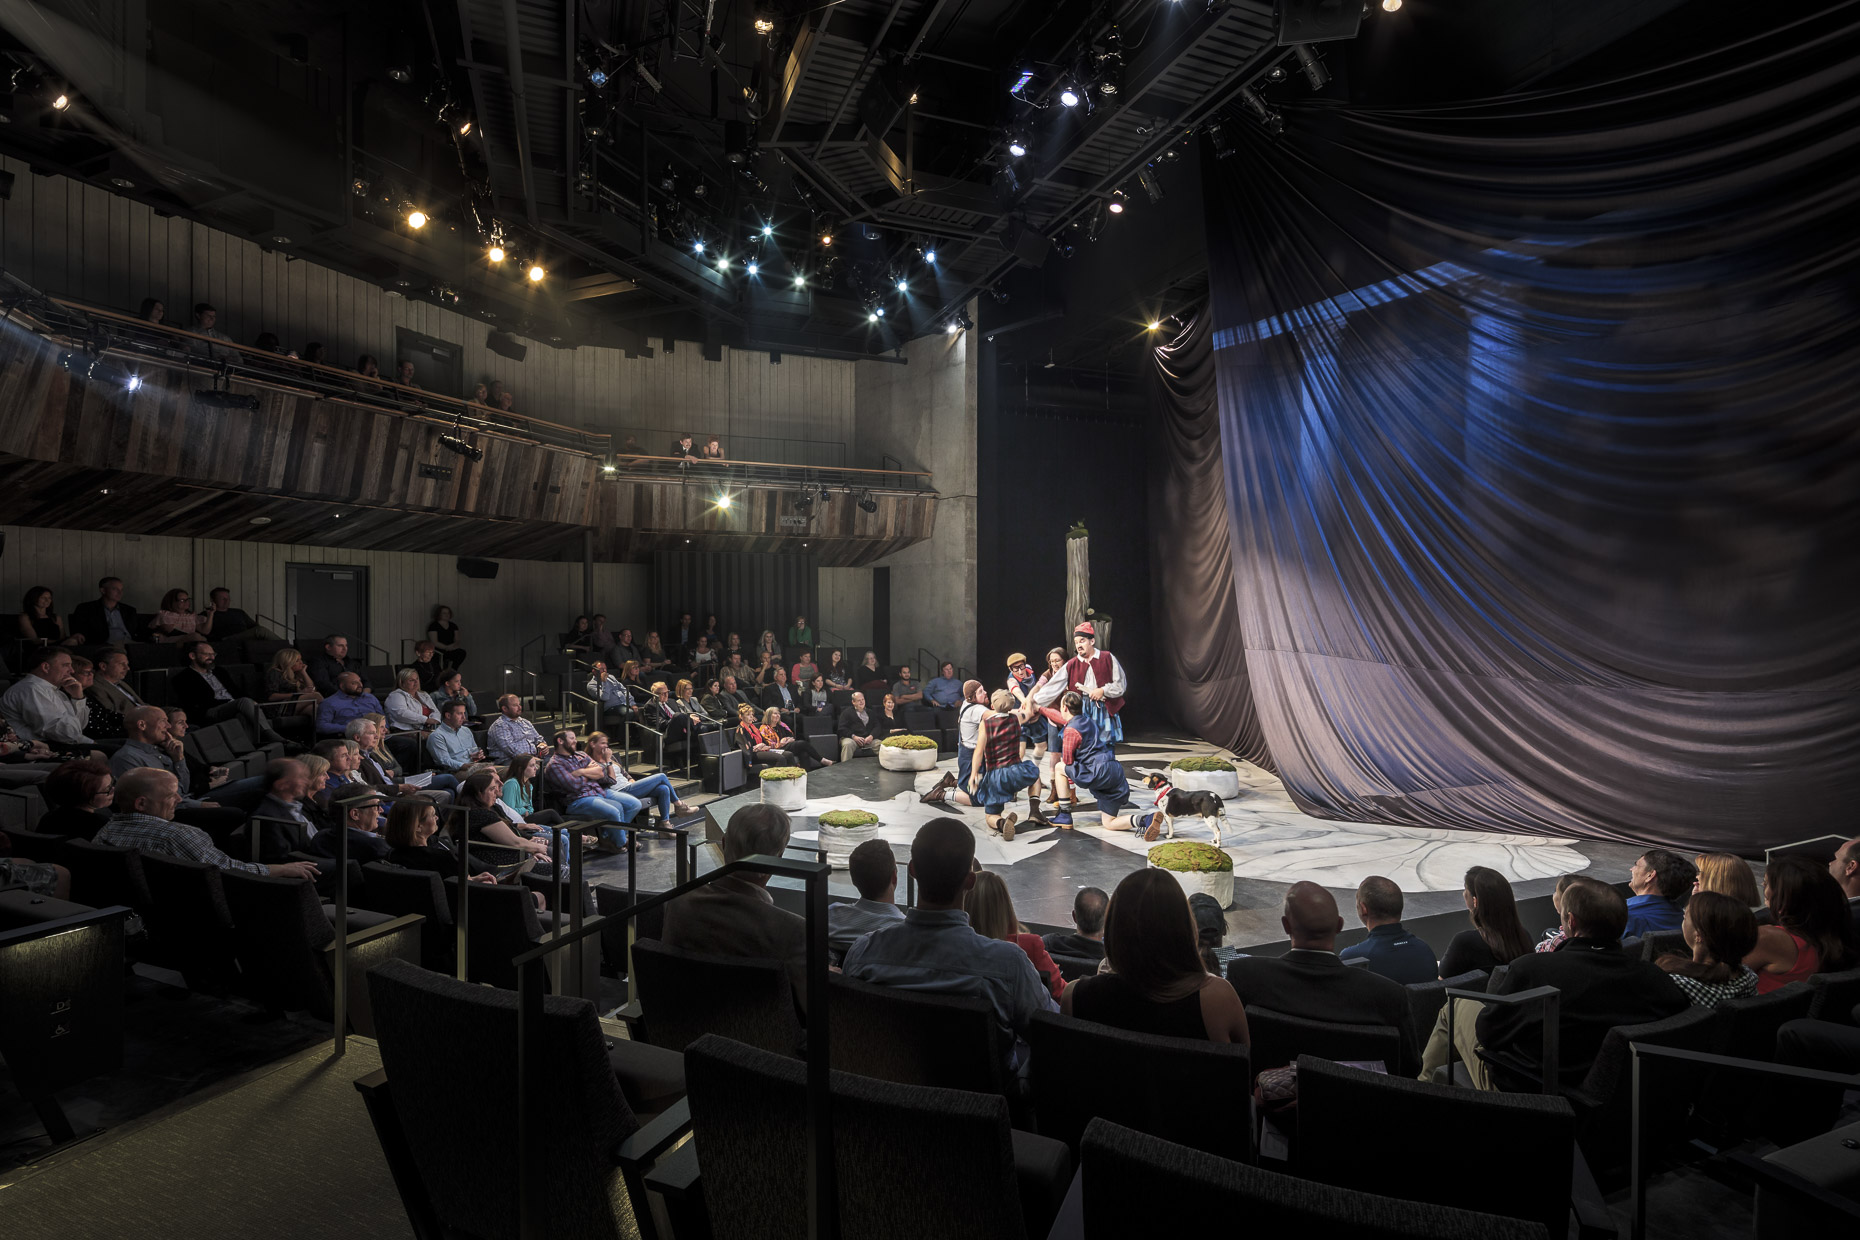 Cincinnati Shakespeare Company Otto M Budig Theater by GBBN photographed by Brad Feinknopf based in Columbus, Ohio